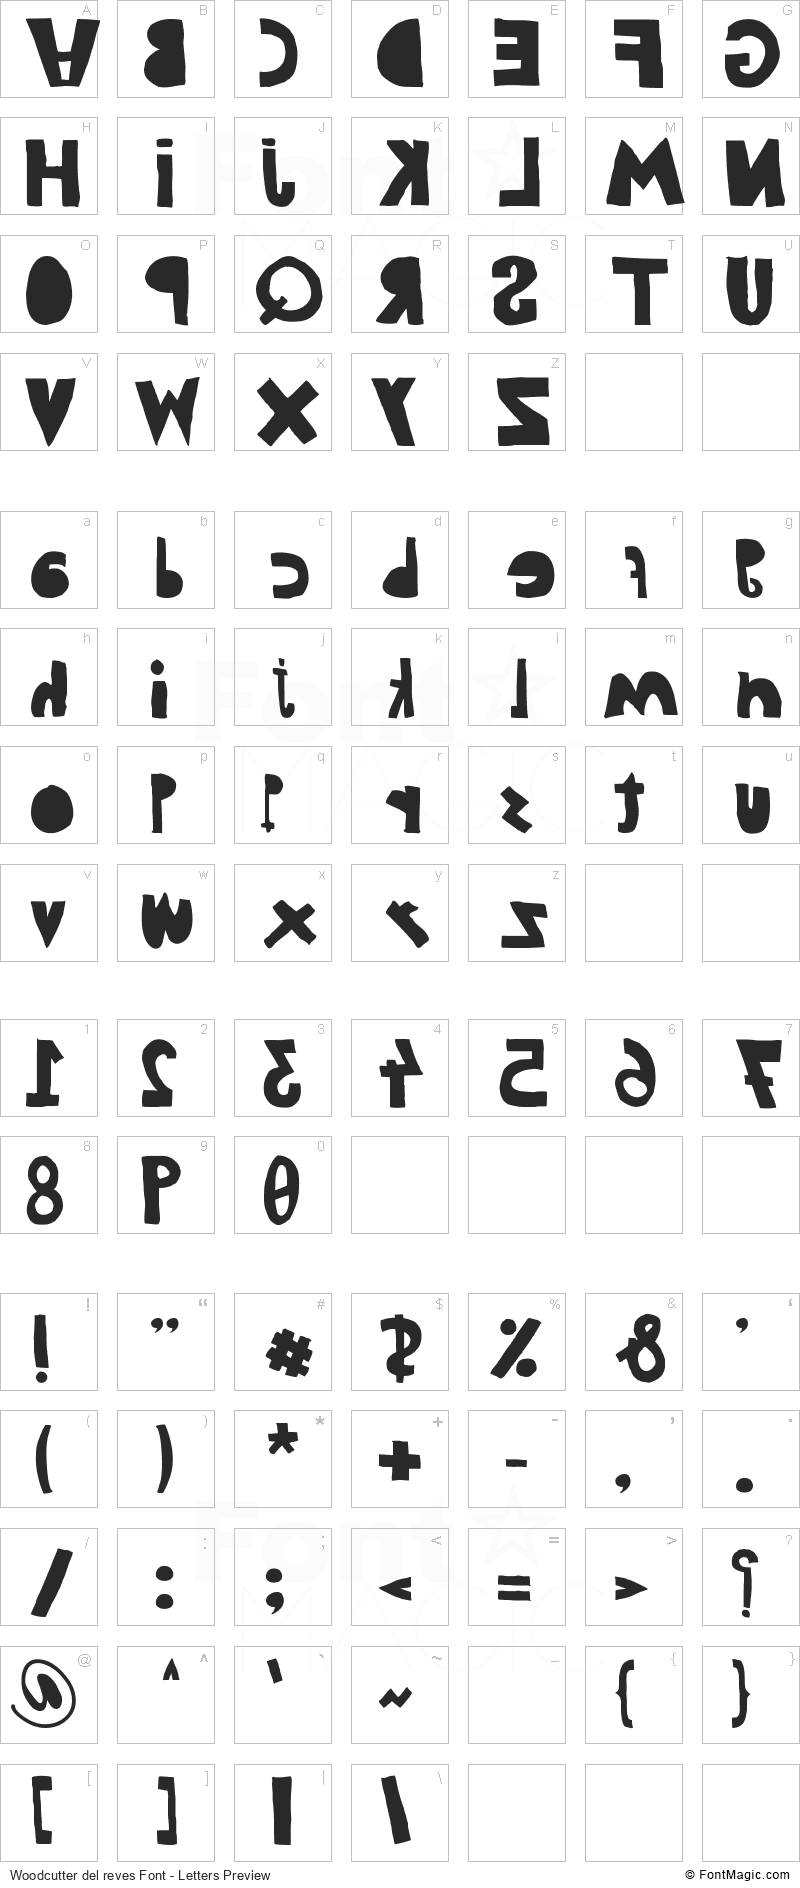 Woodcutter del reves Font - All Latters Preview Chart